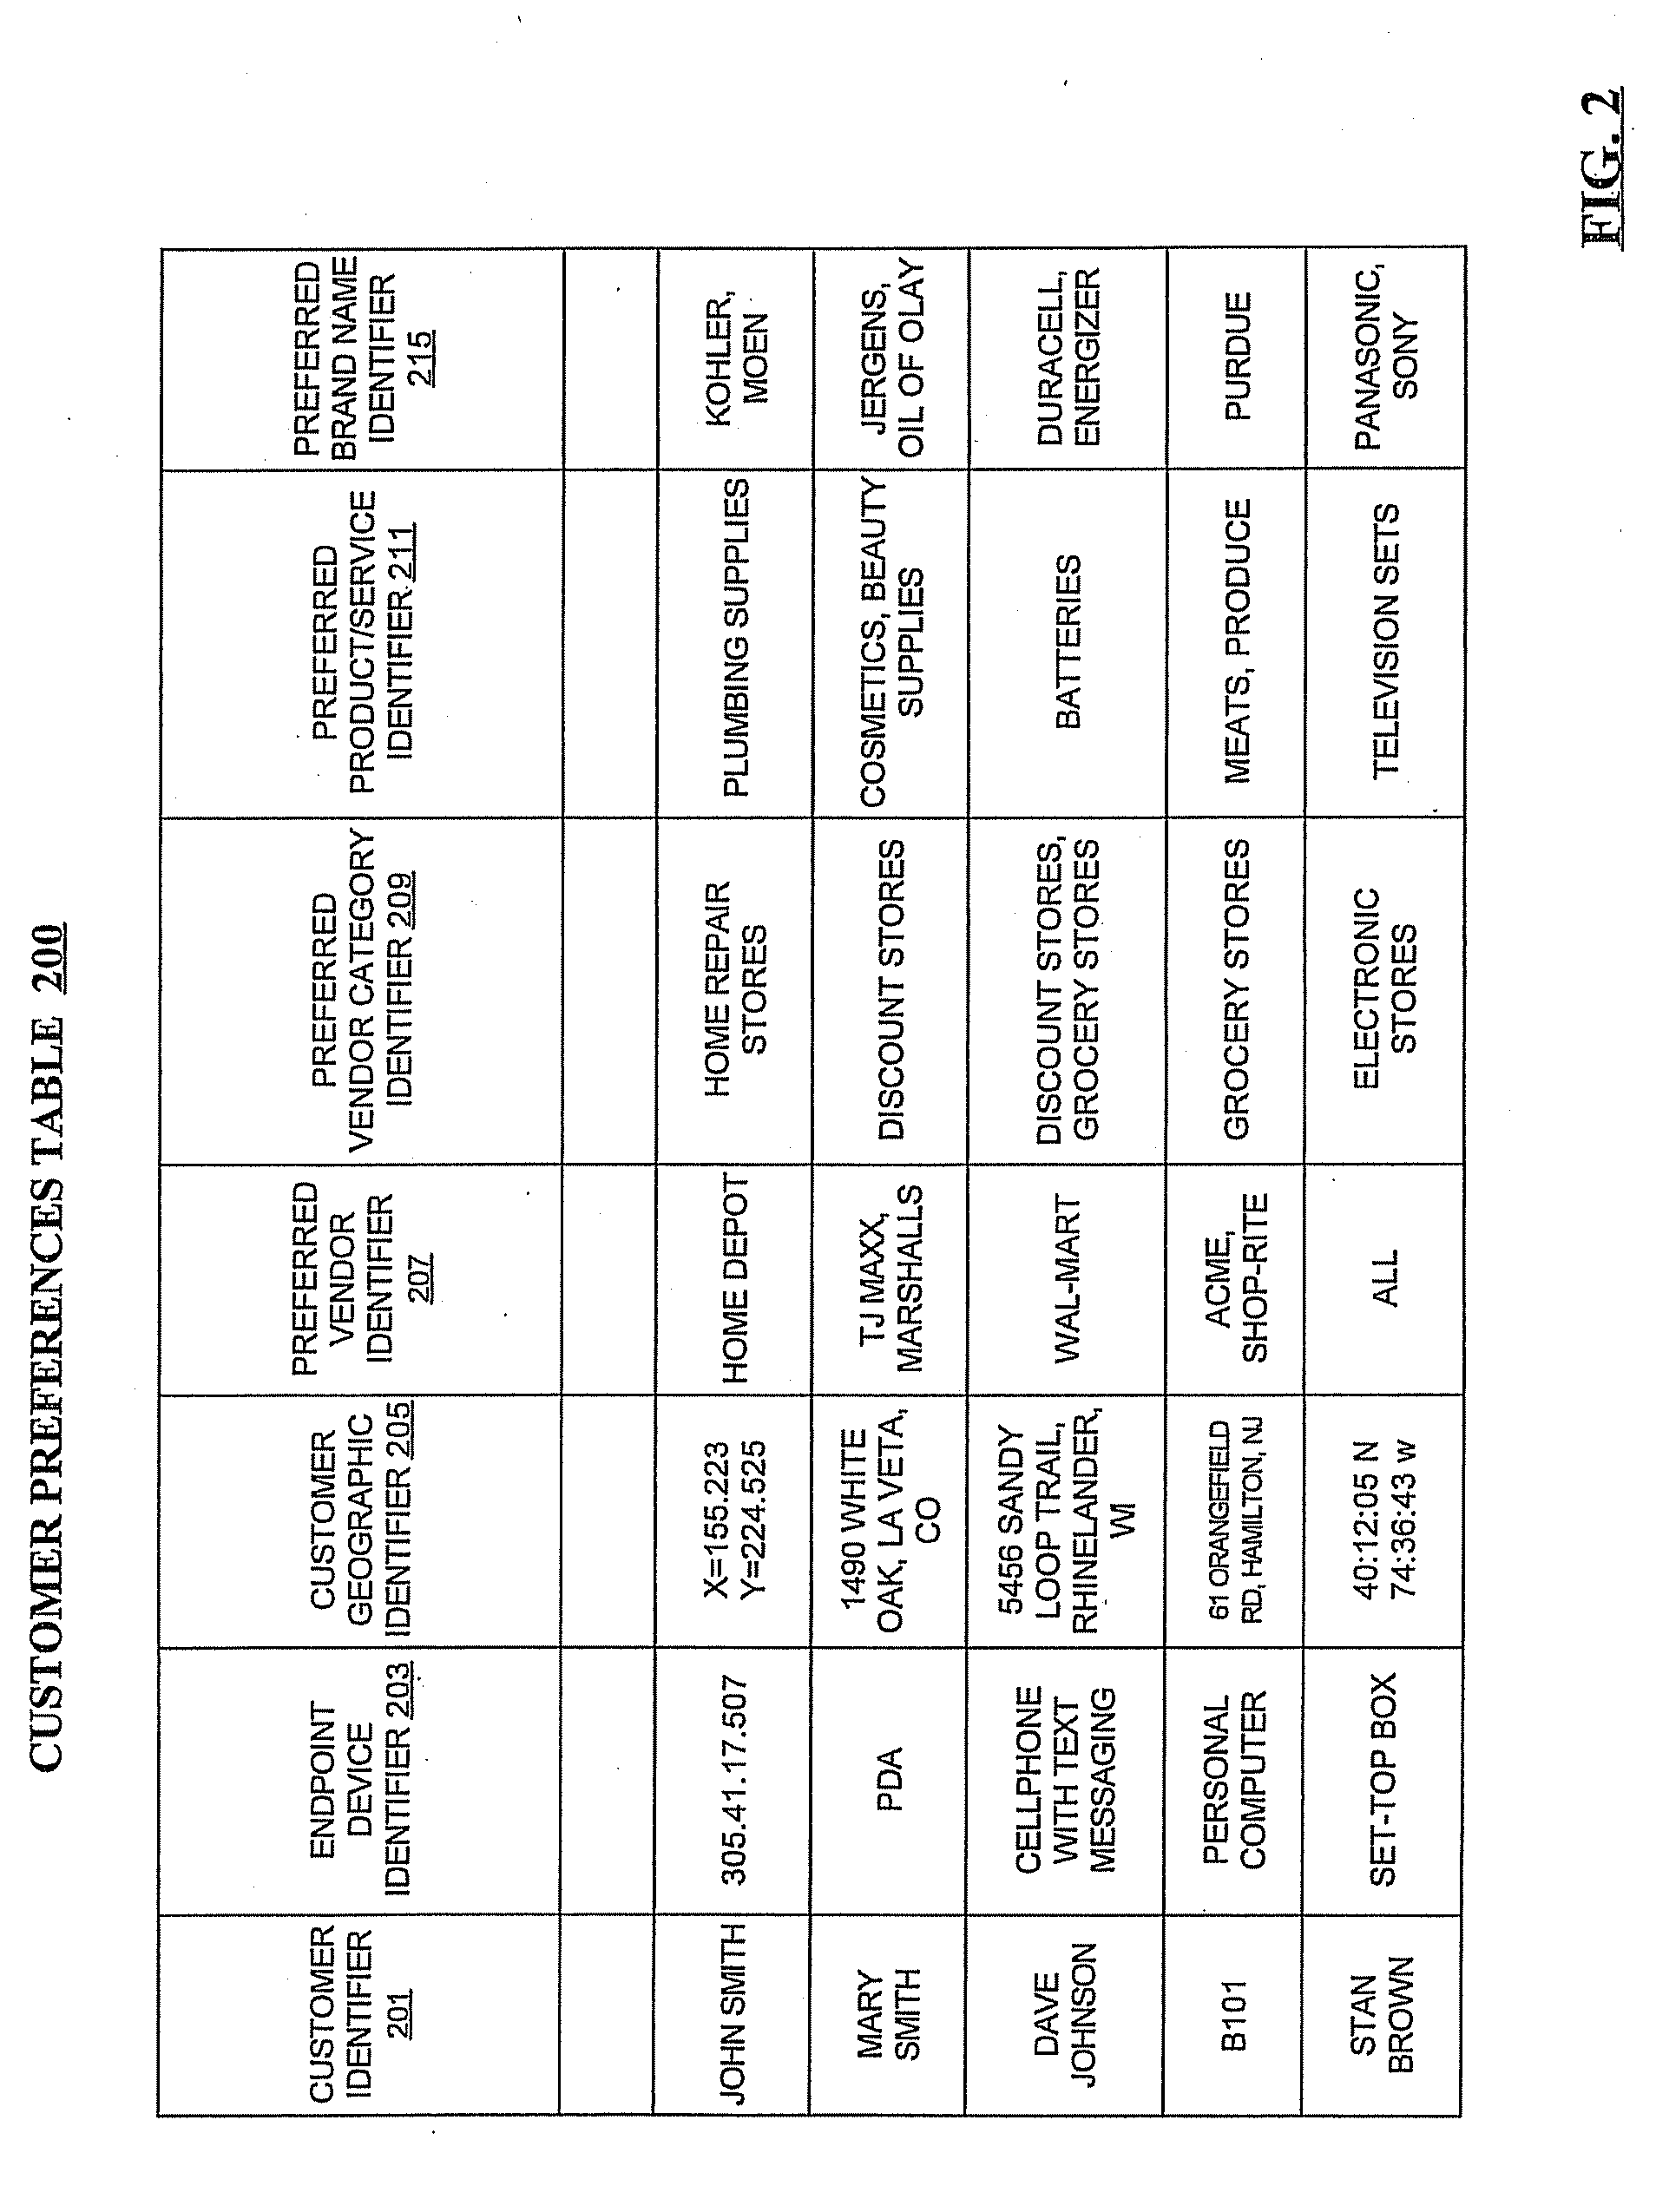 Methods, devices, systems, and computer program products for distributing electronic coupons